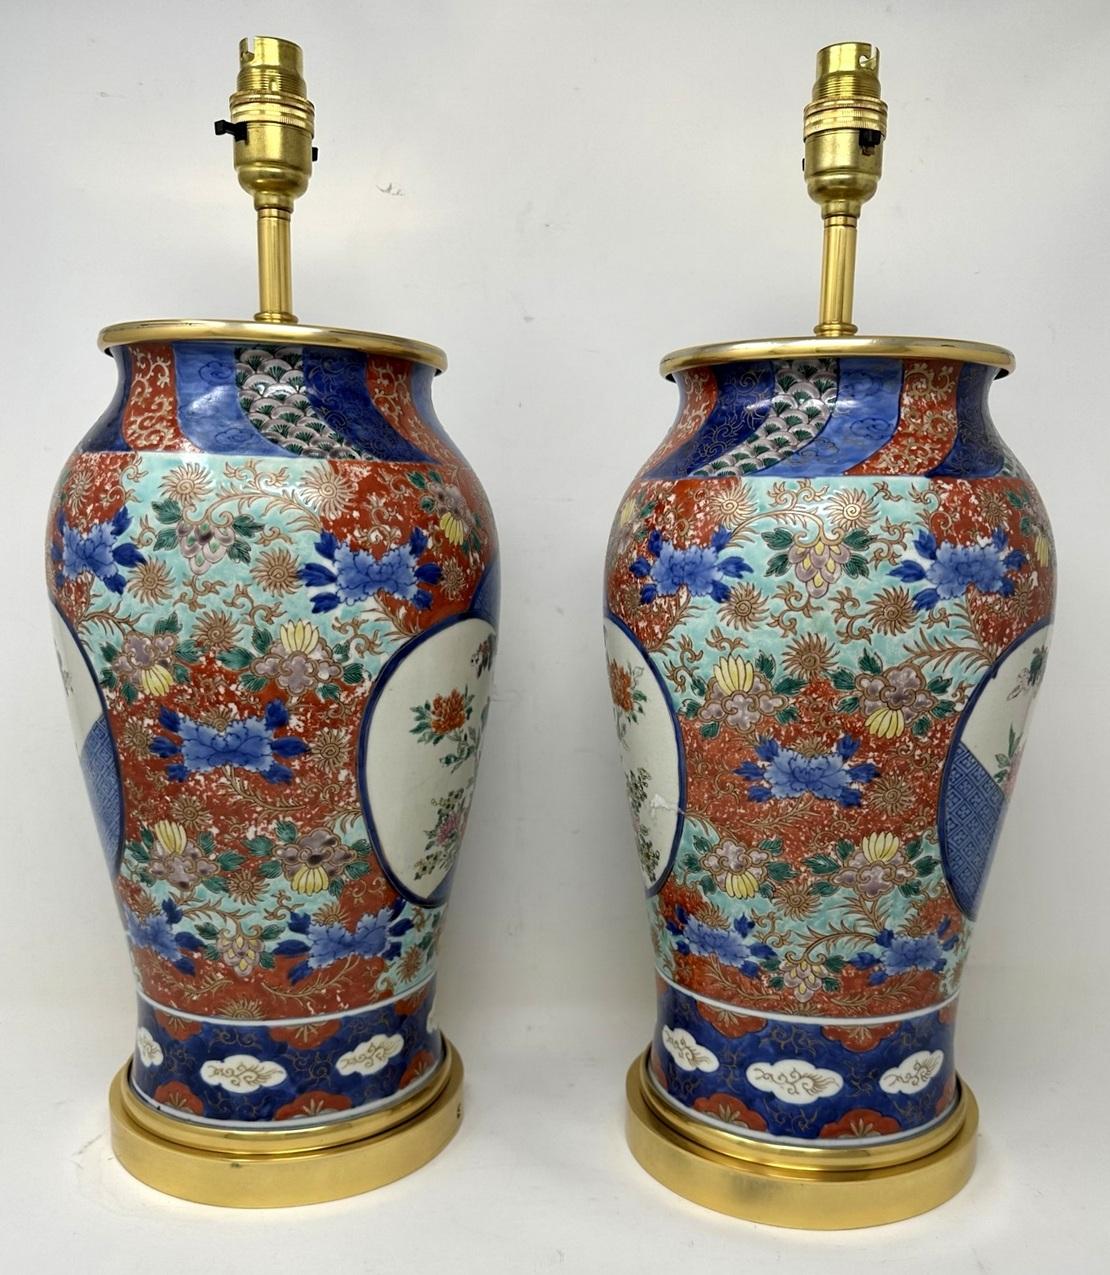 Antique Pair Japanese Chinese Imari Porcelain Ormolu Table Lamps Blue Red Gilt In Good Condition For Sale In Dublin, Ireland